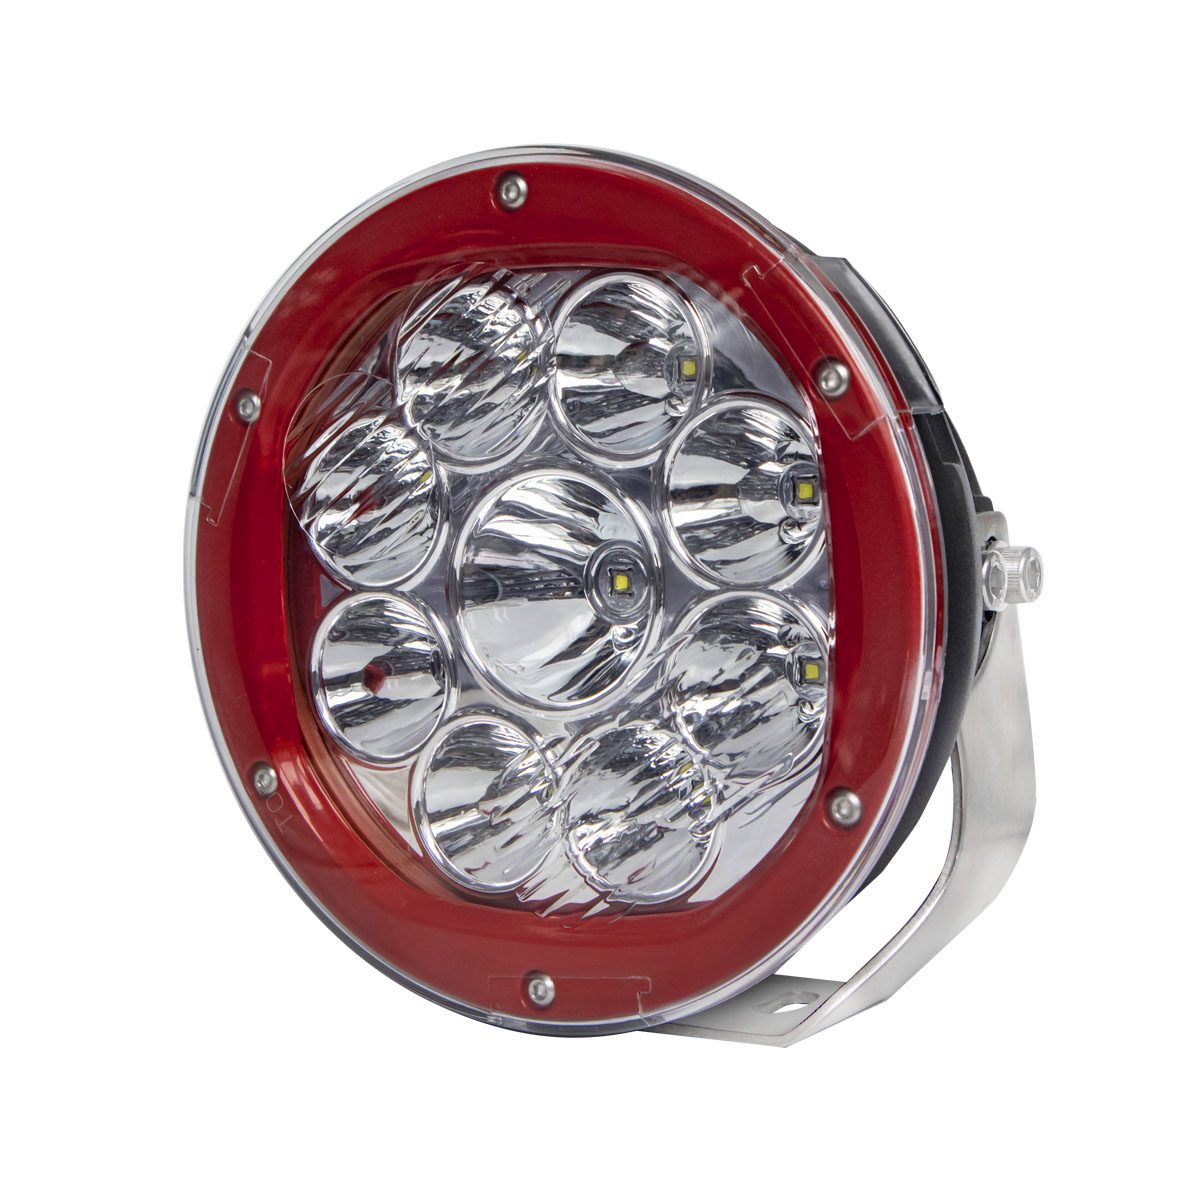 Driving Light - OW-7090 90w